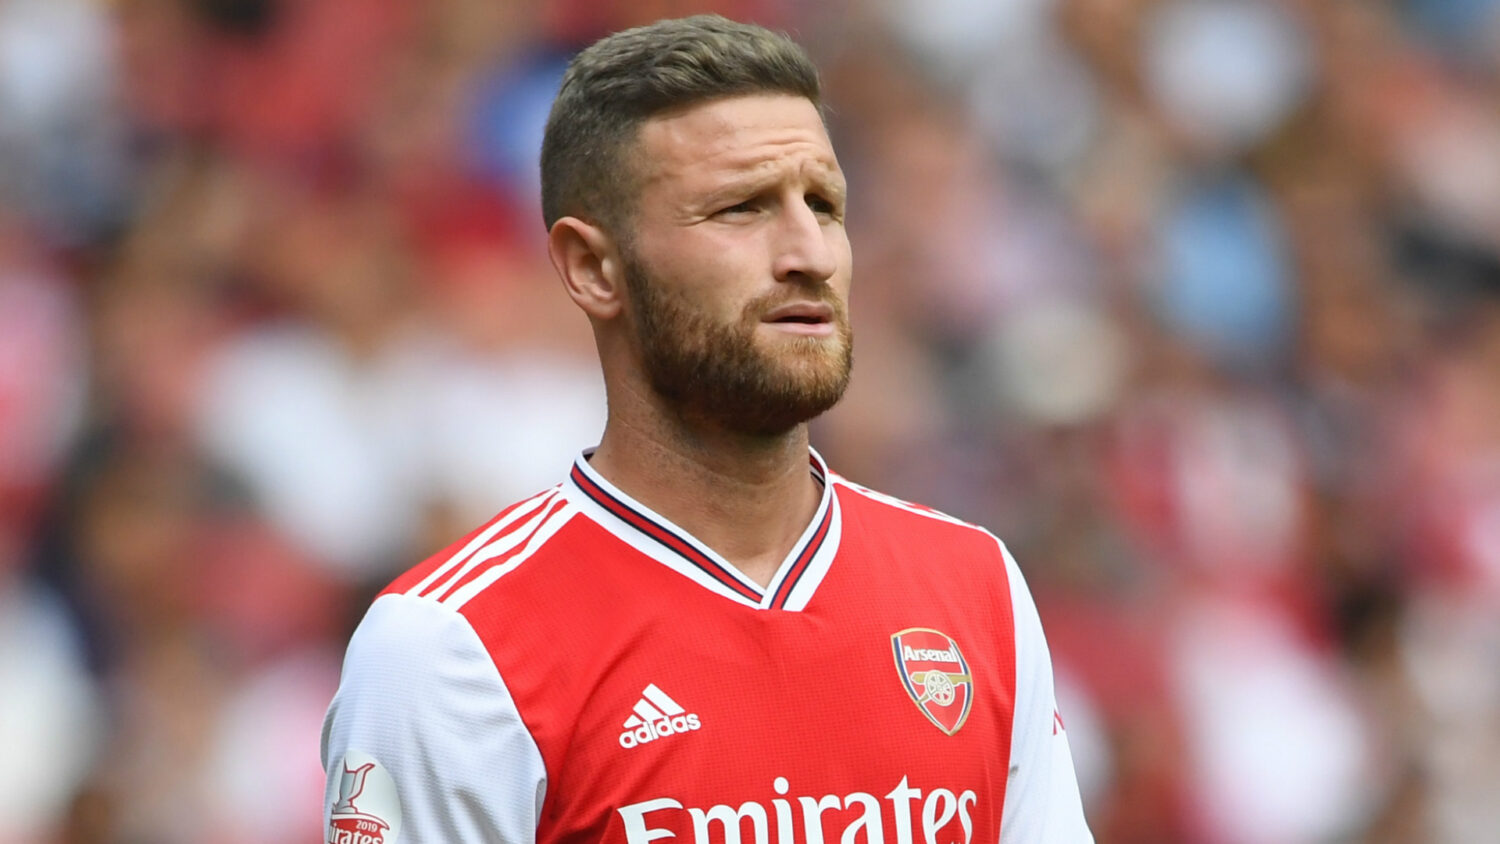 Mustafi will not play FA Cup final against Chelsea - Arsenal